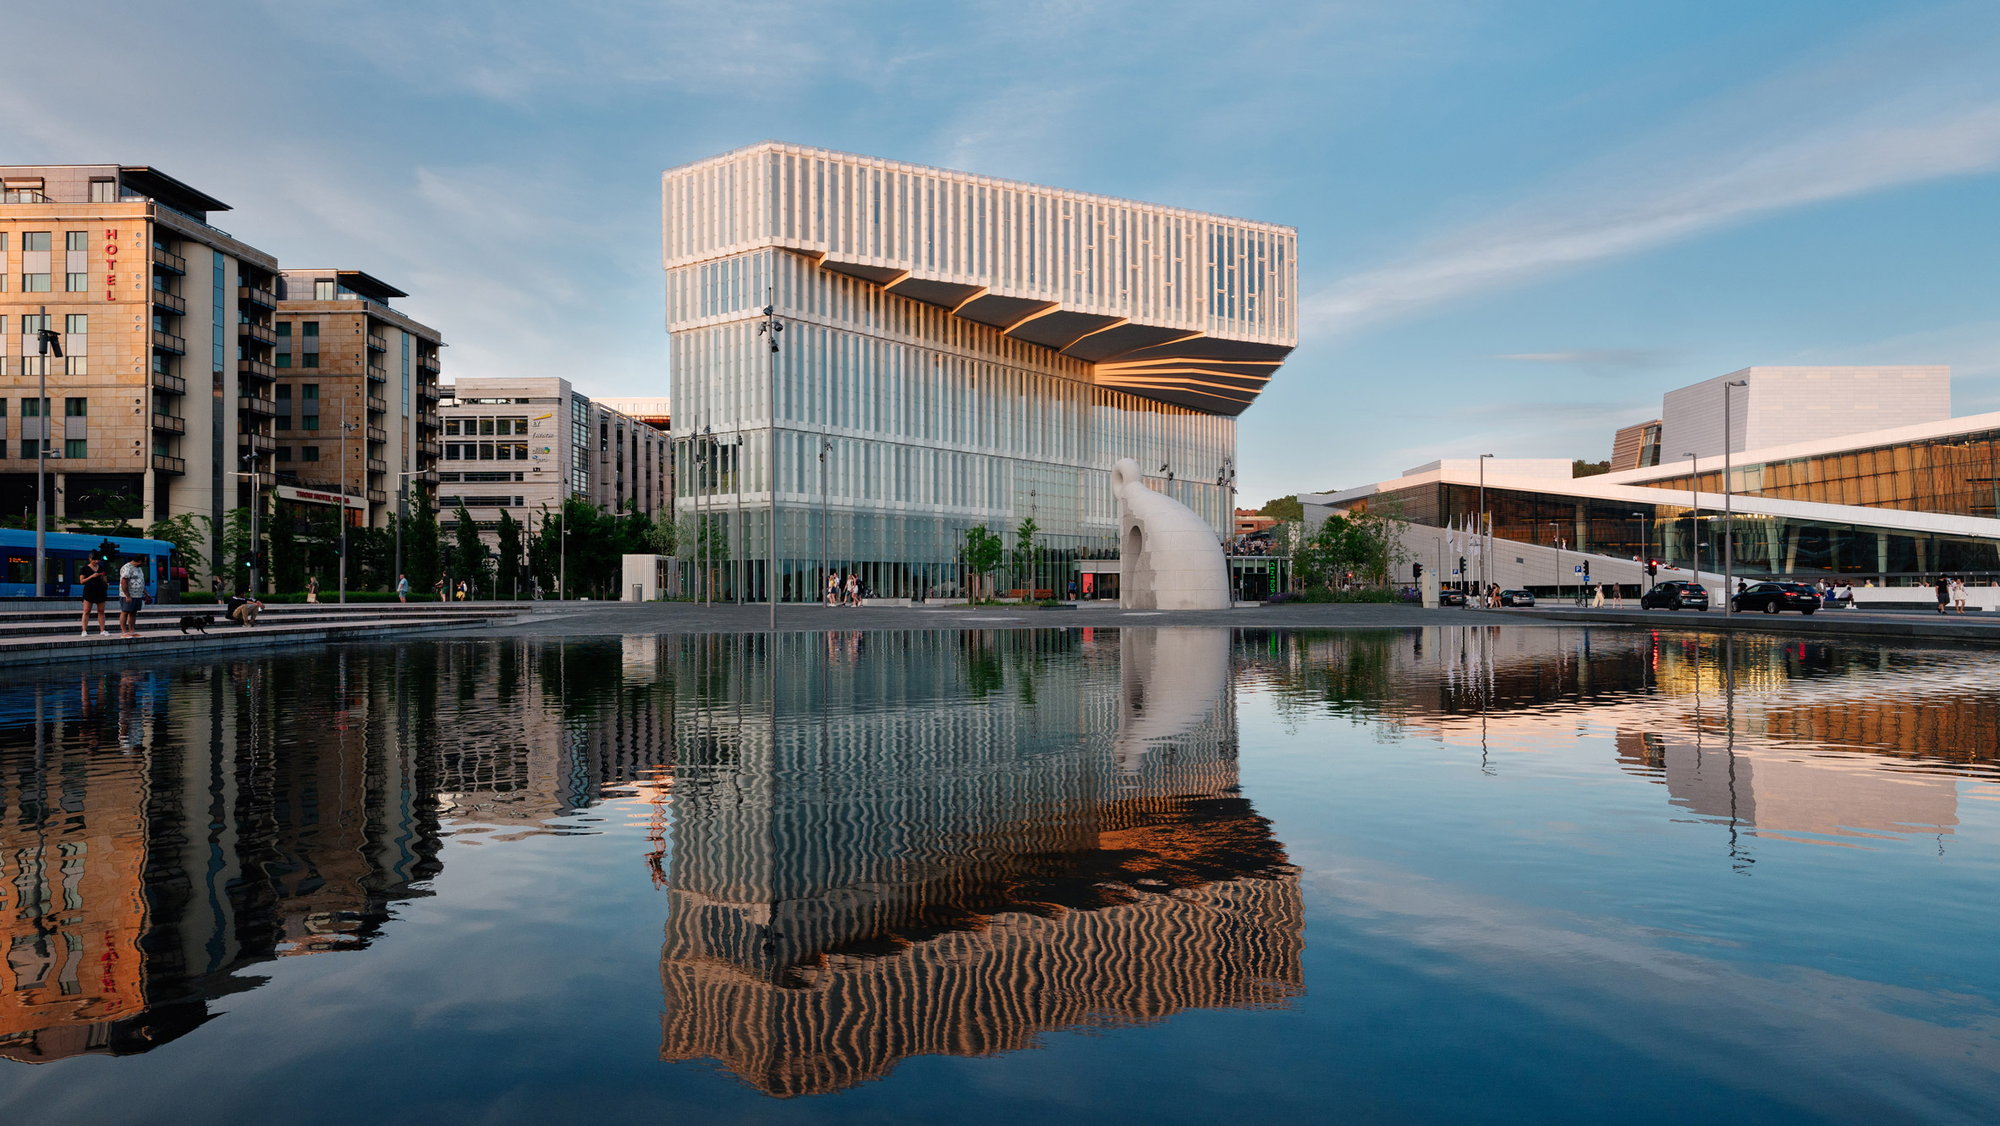 Oslo?s Stunning New Public Library Cantilevers Over the Waterfront